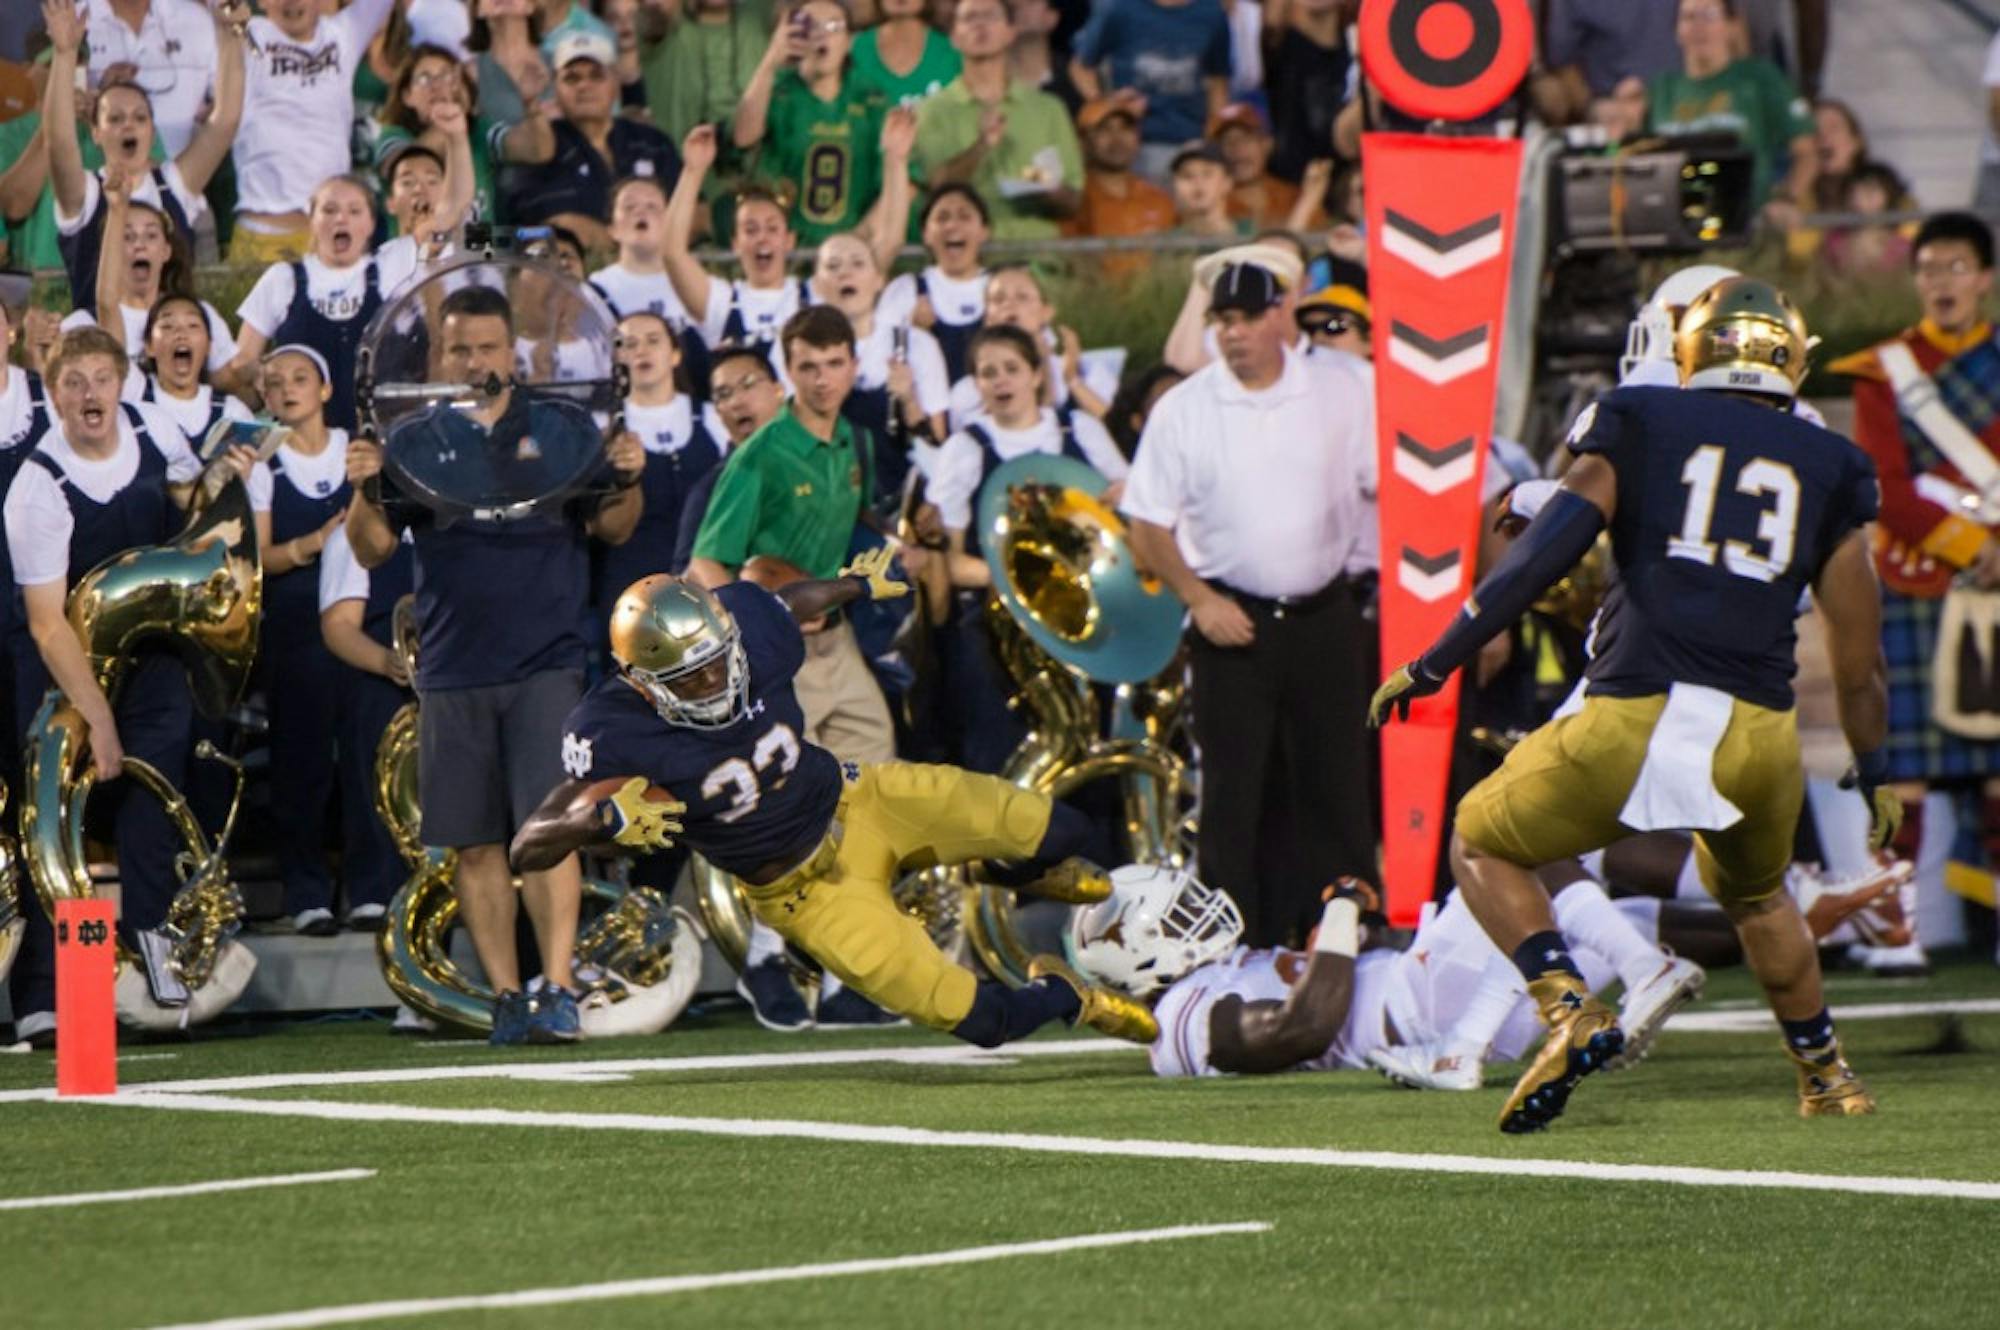 Irish freshman running back Josh Adams dives for the goal line during Notre Dame's 38-3 win over Texas on Sept. 5 at Notre Dame Stadium.